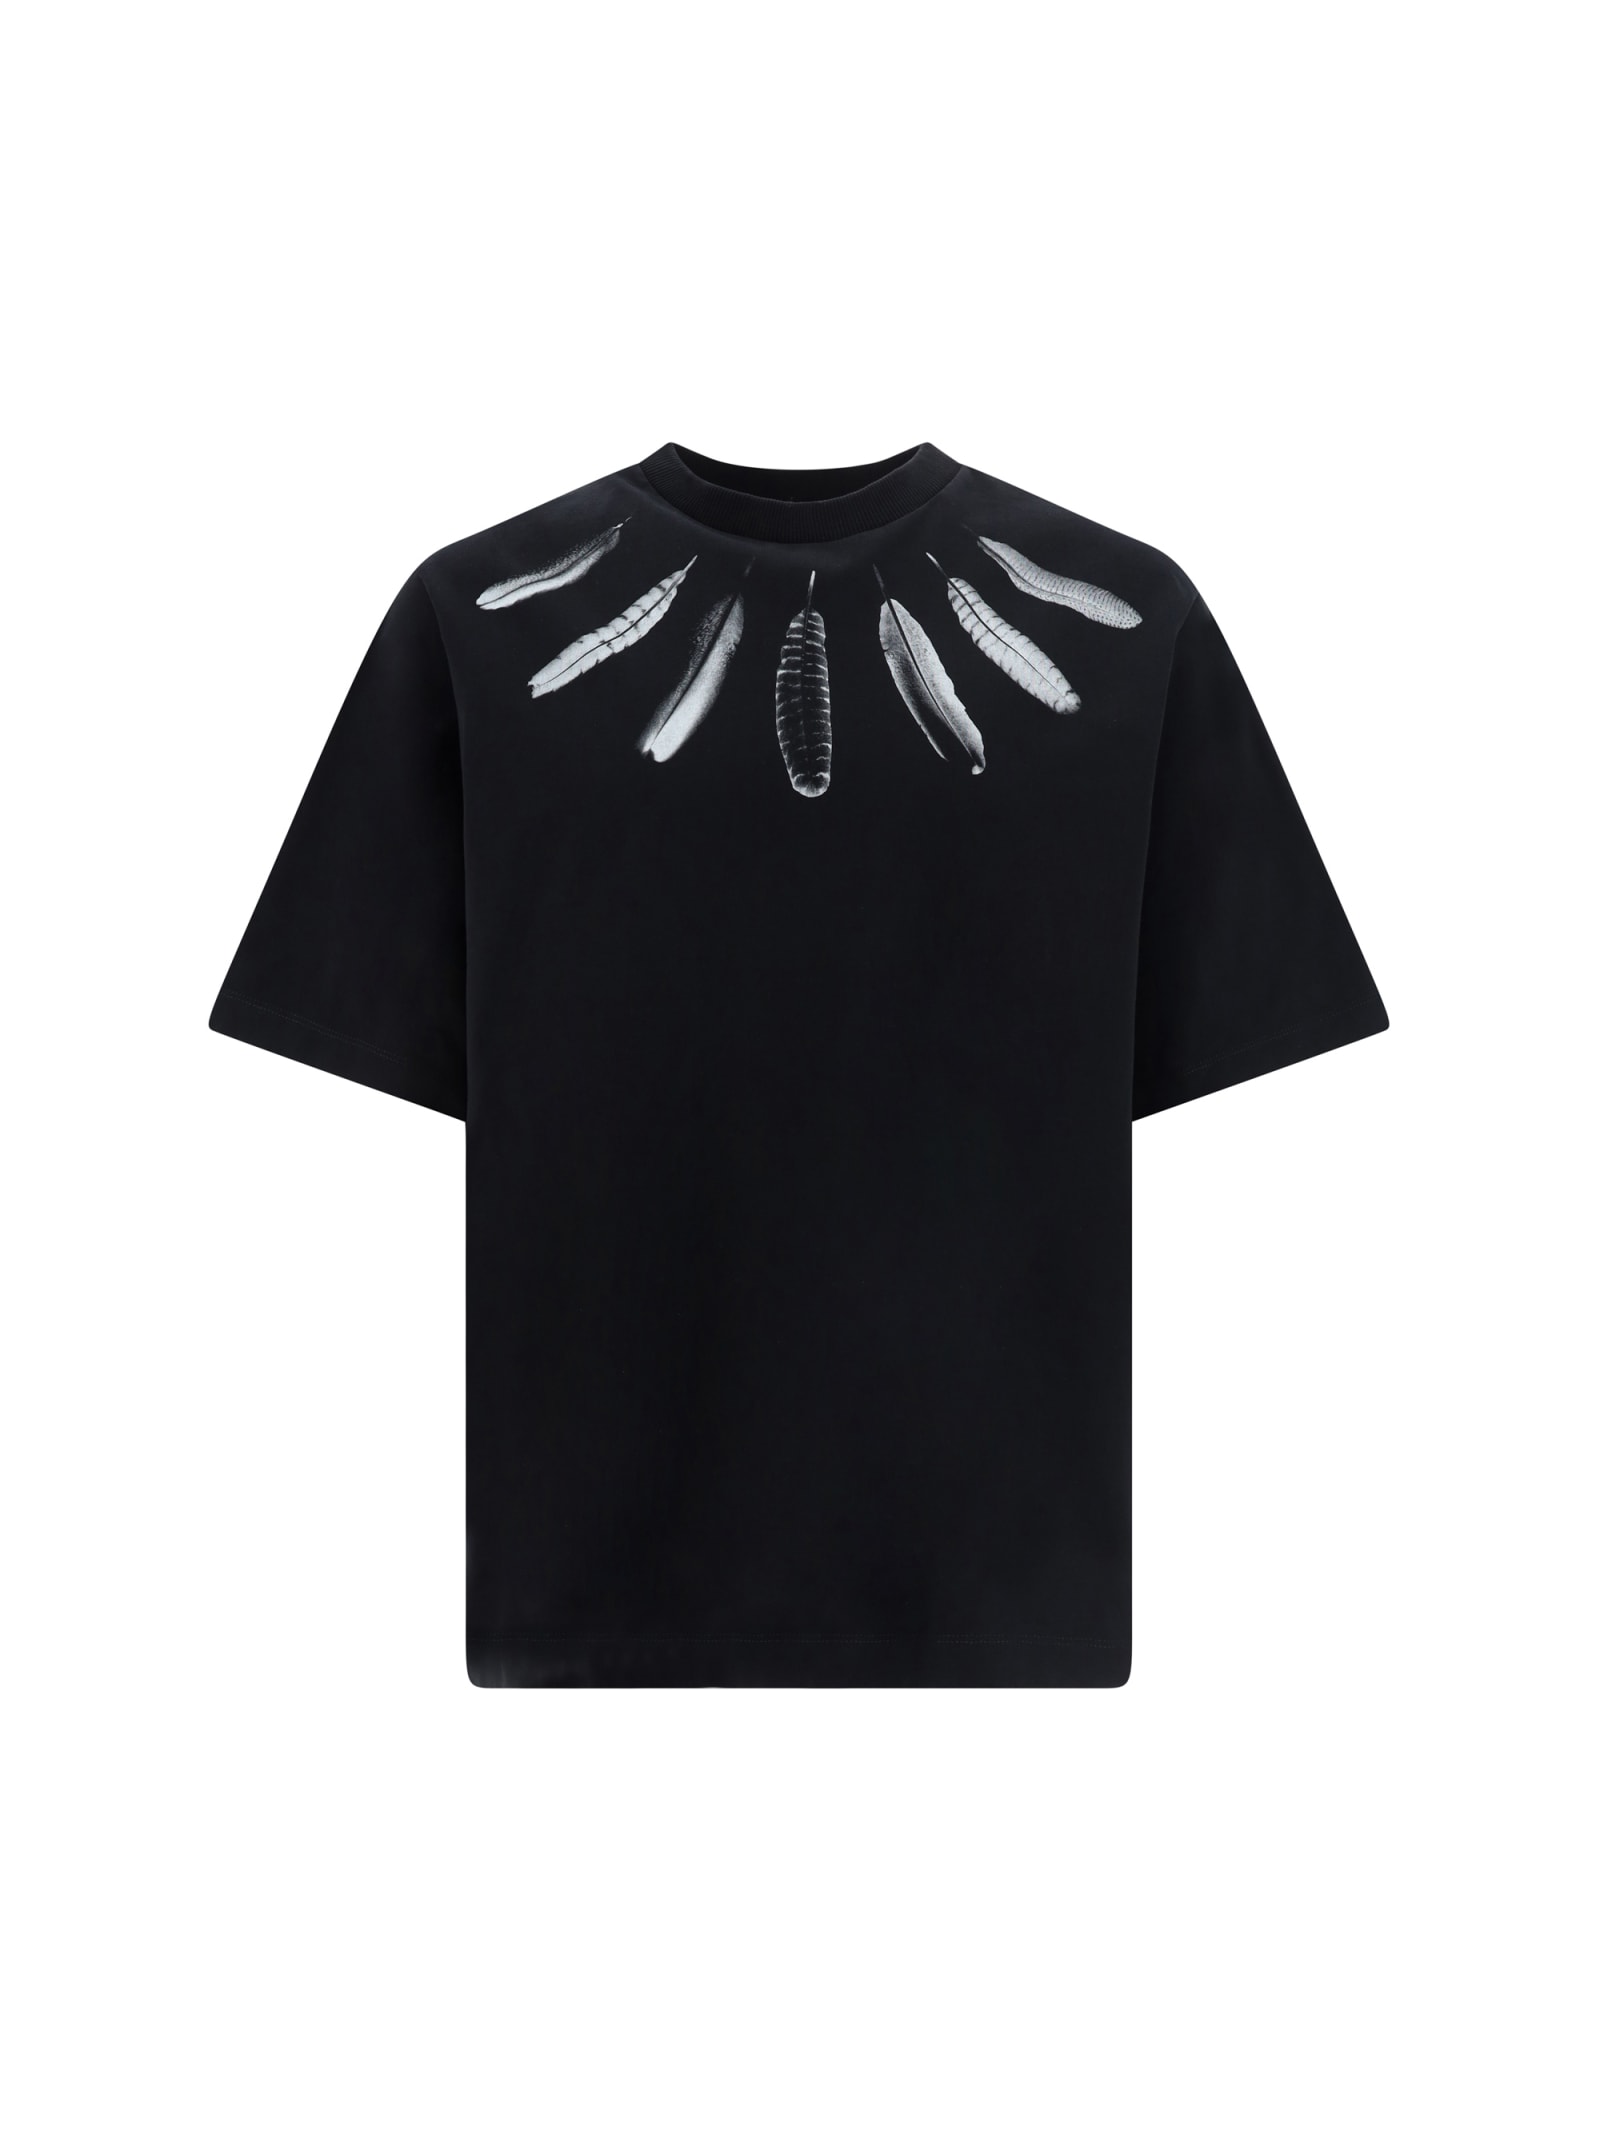 Collar Feathers T-shirt